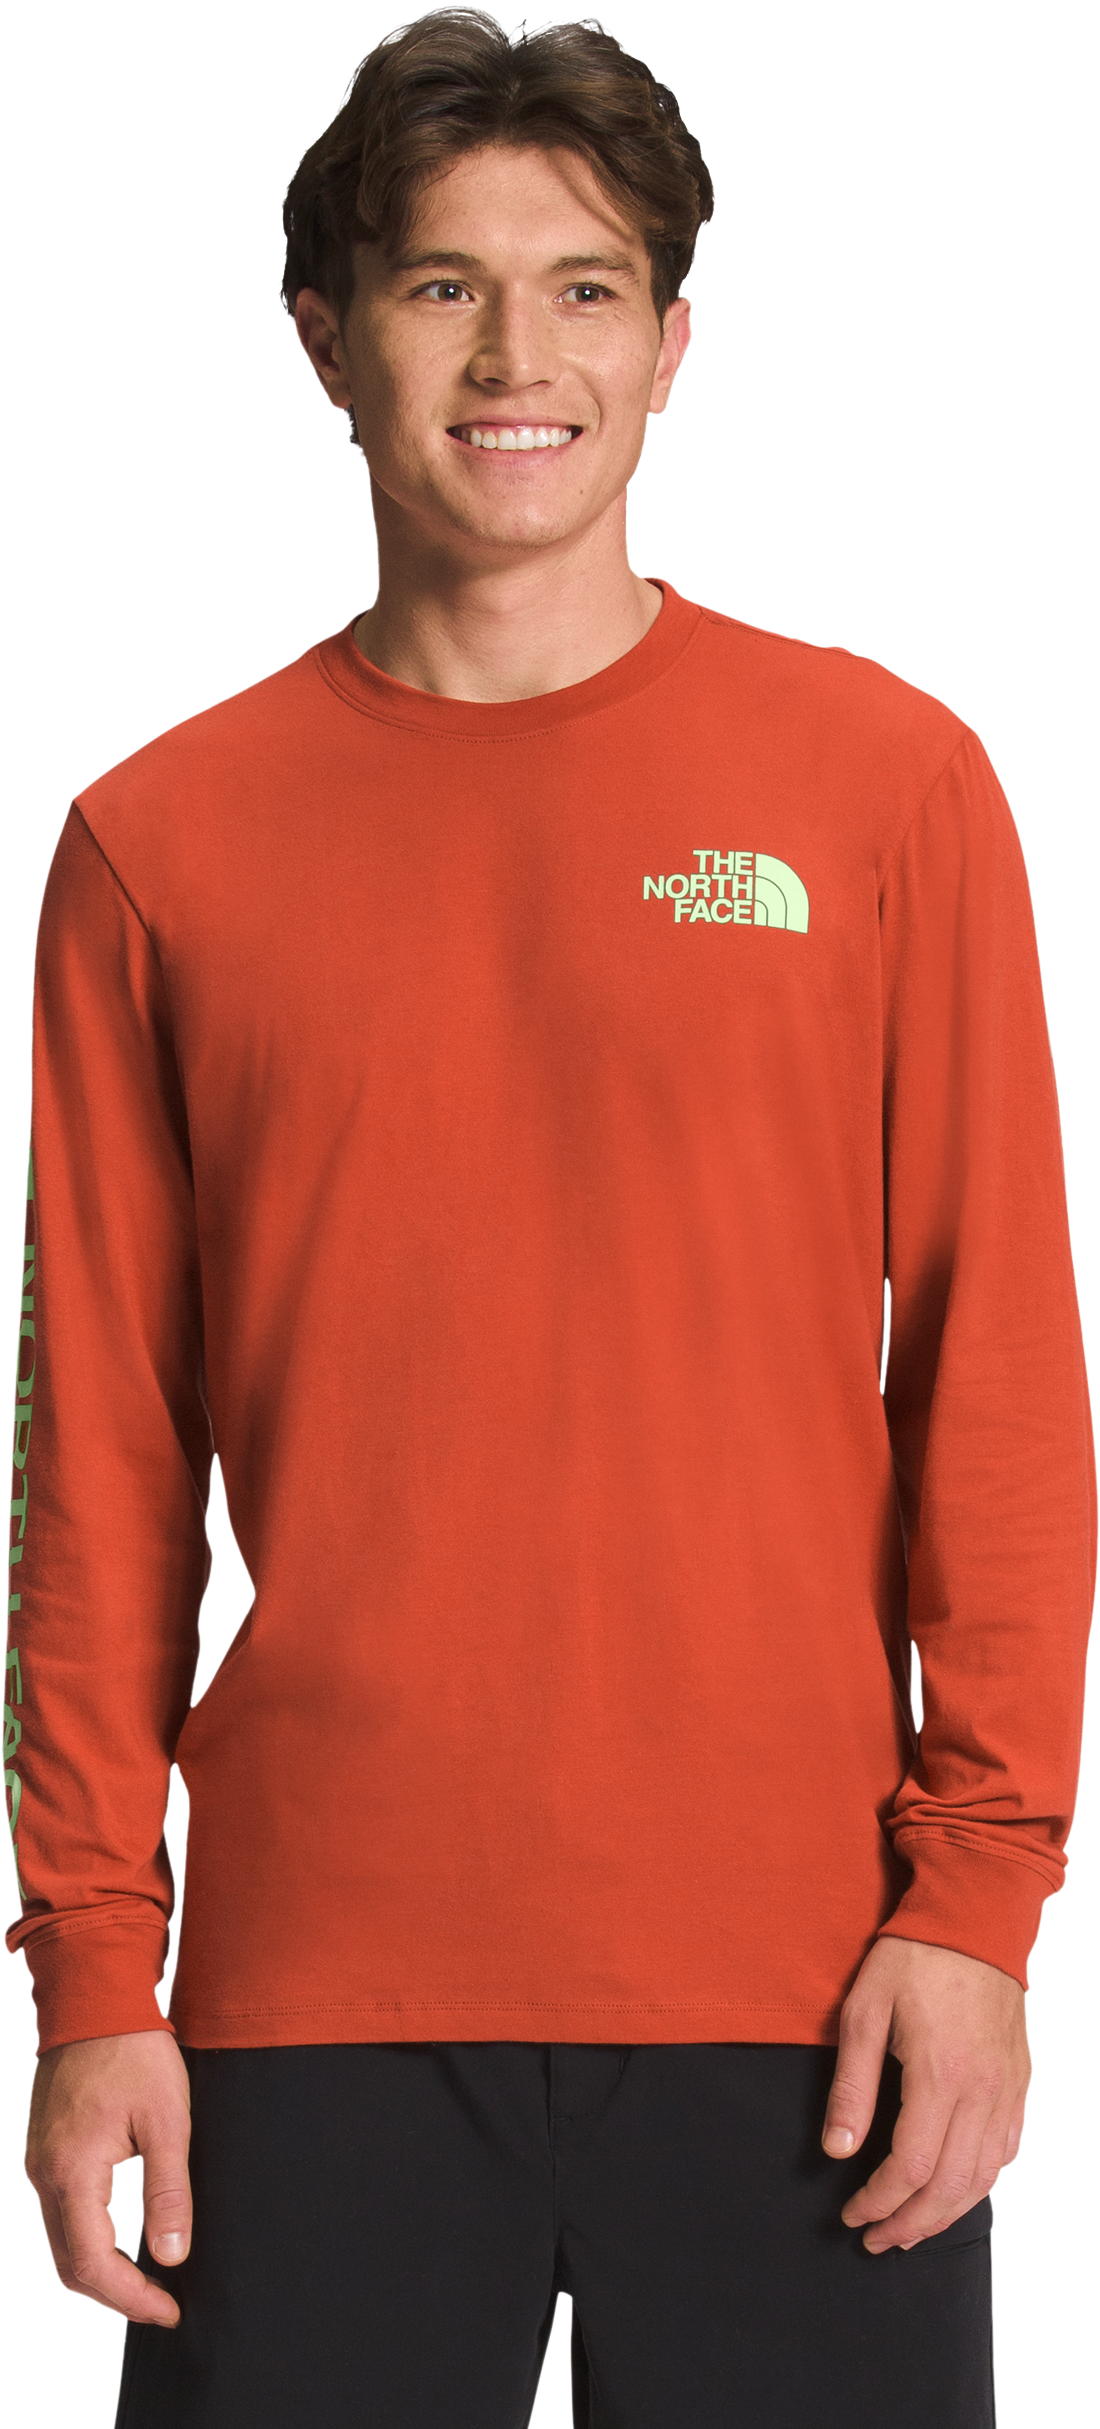 The North Face Hit Graphic Long-Sleeve T-Shirt for Men - Rust Bronze/Lime Cream - 2XL